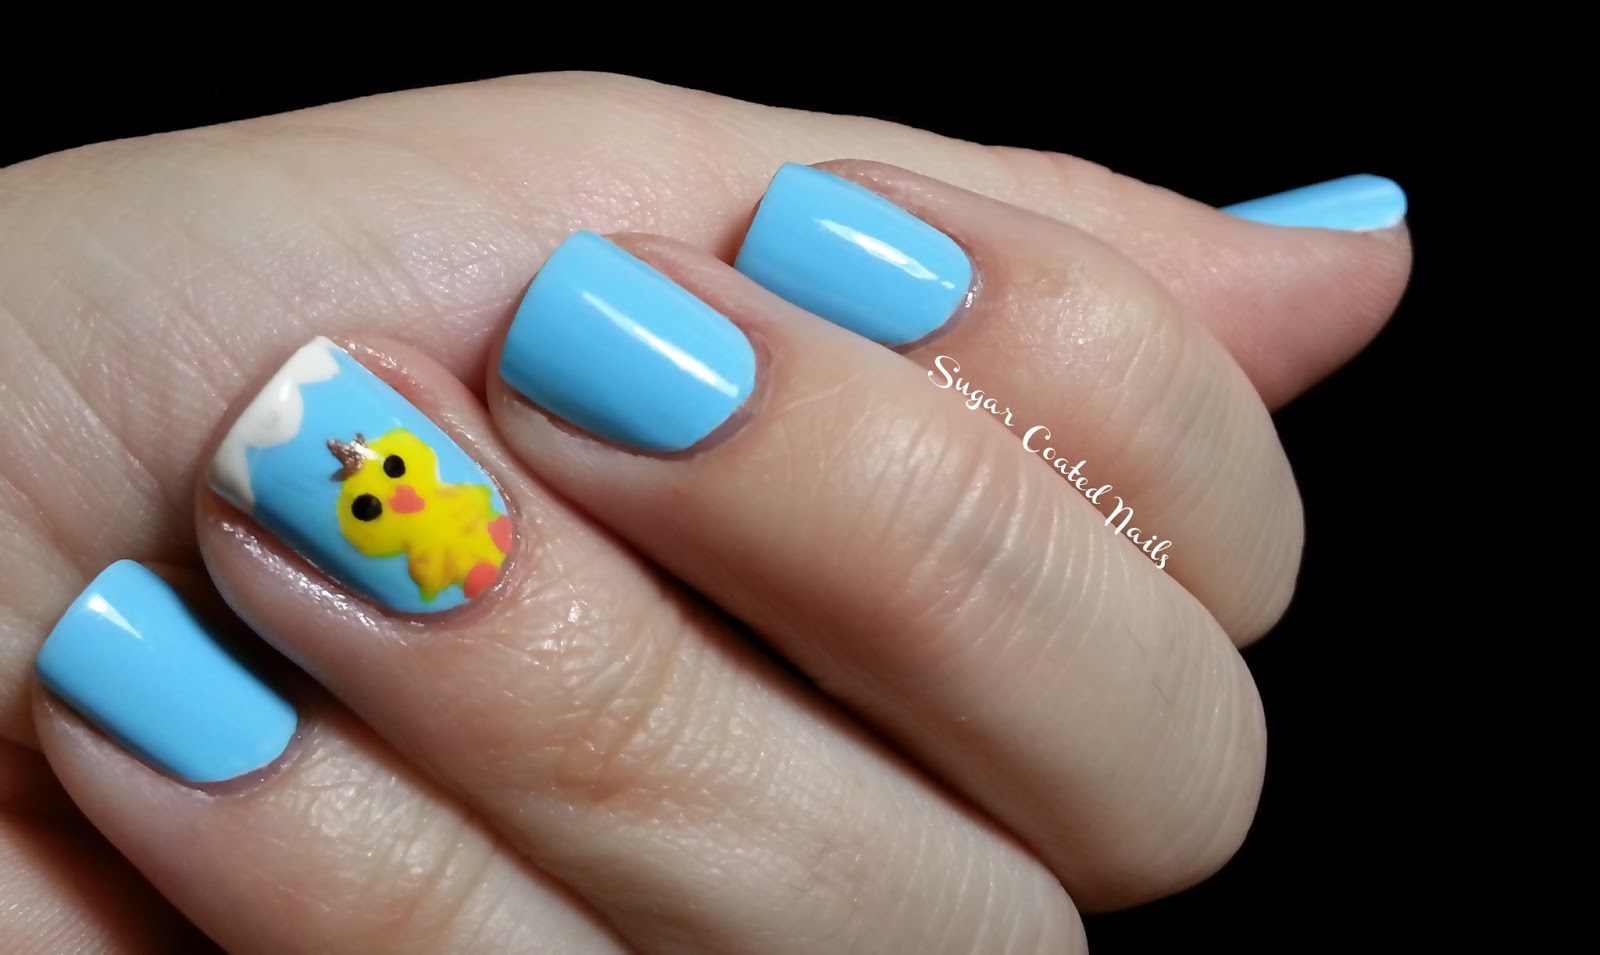 3. "Easy Easter Chick Nails" - wide 5